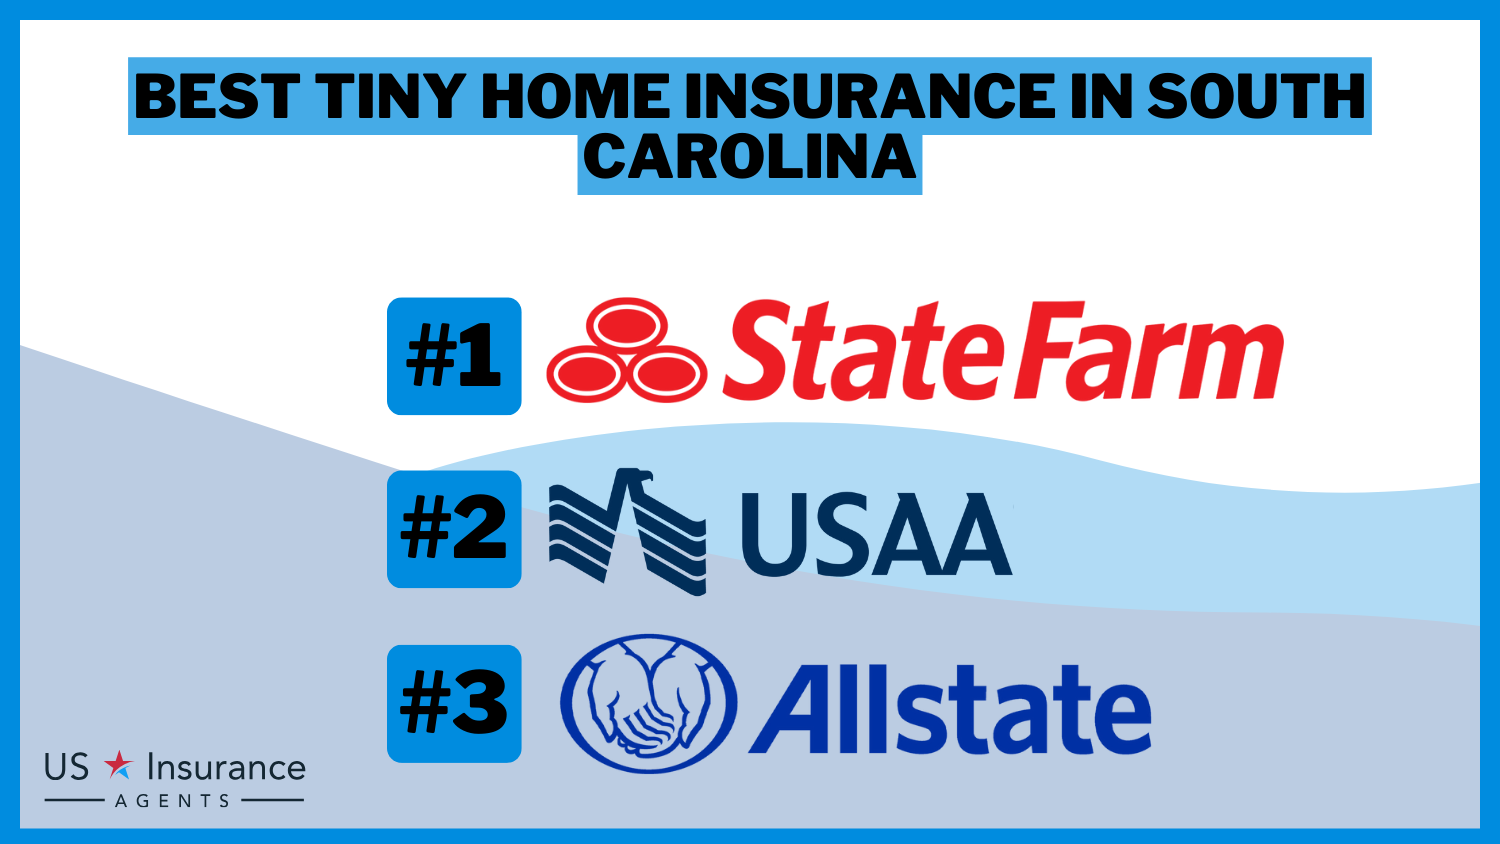 Best Tiny Home Insurance in South Carolina: State Farm, USAA and Allstate